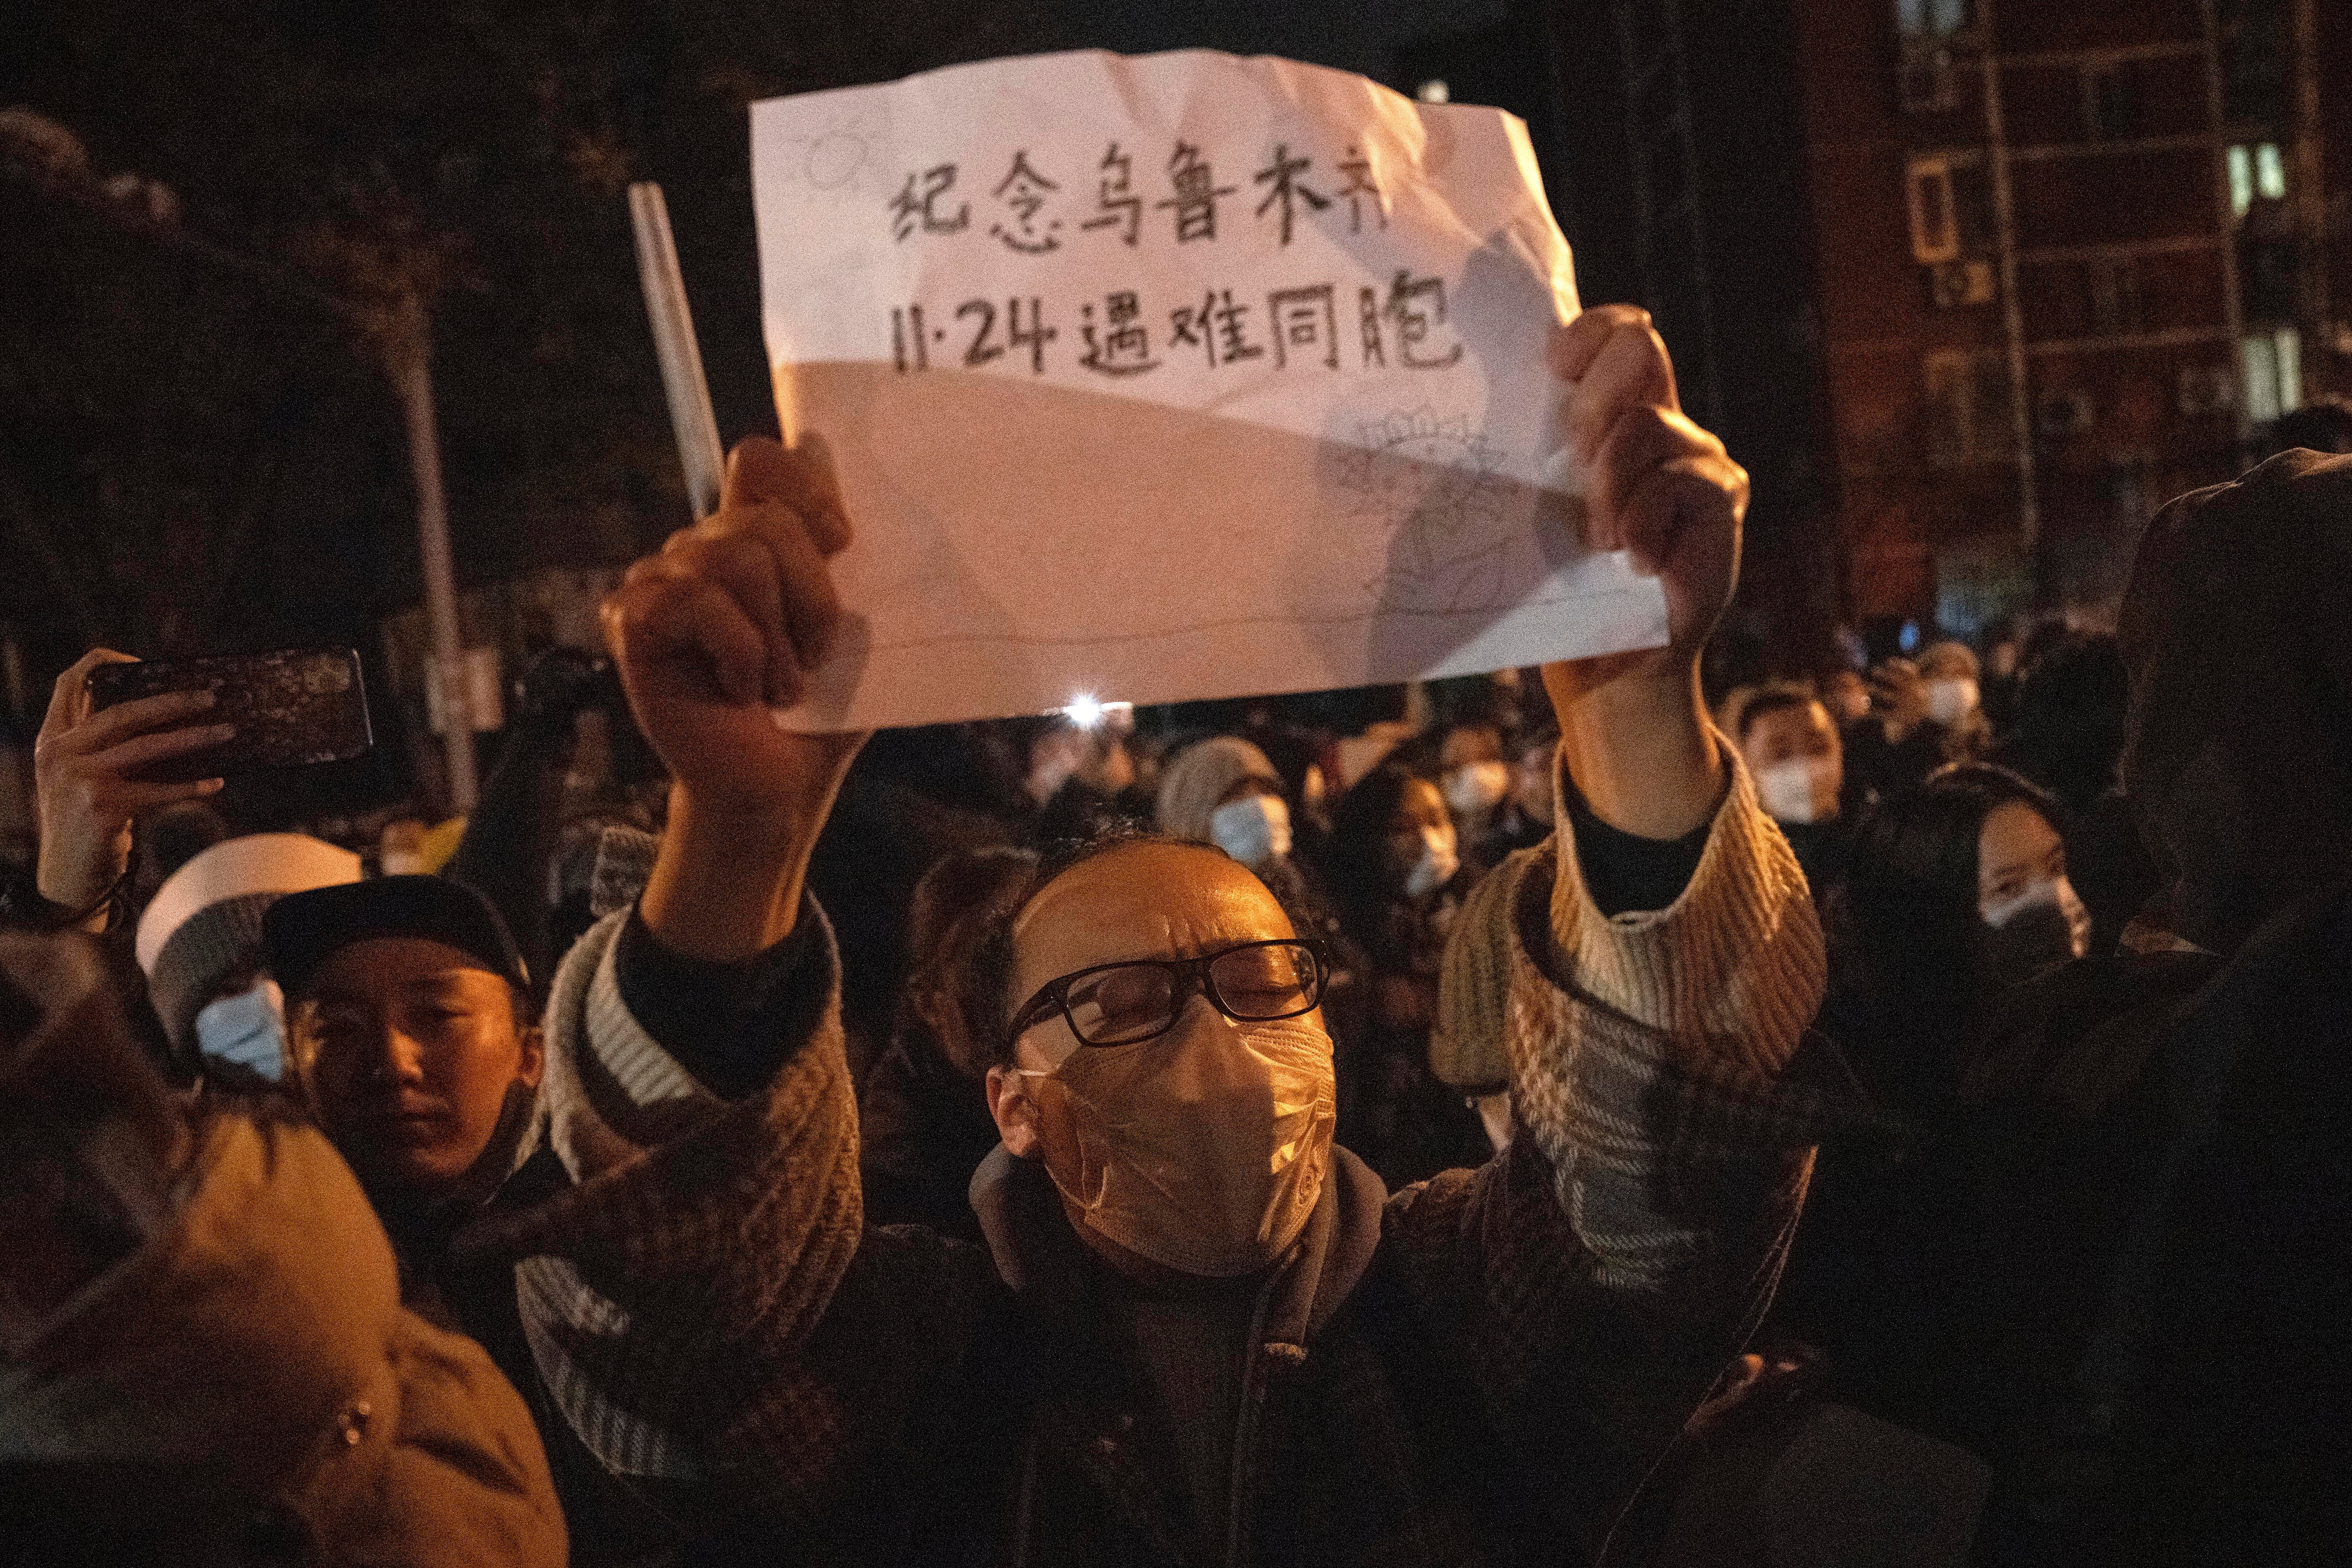 A protester holds up a sign which reads "Commemorate Urumqi Nov 24 compatriots who died" in Beijing